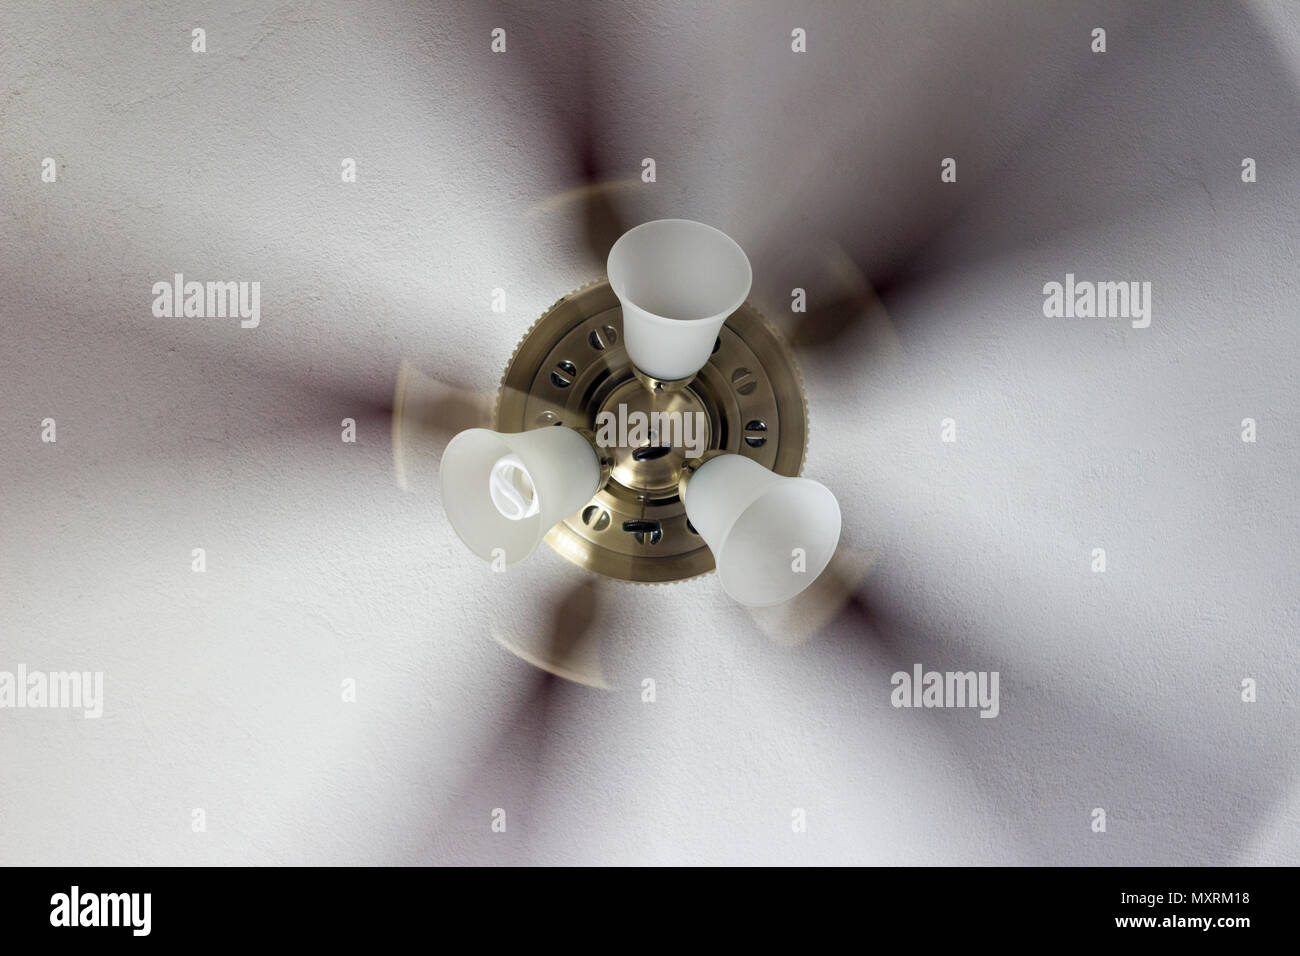 Classic polished brass ceiling fan with light in motion. Stock Photo